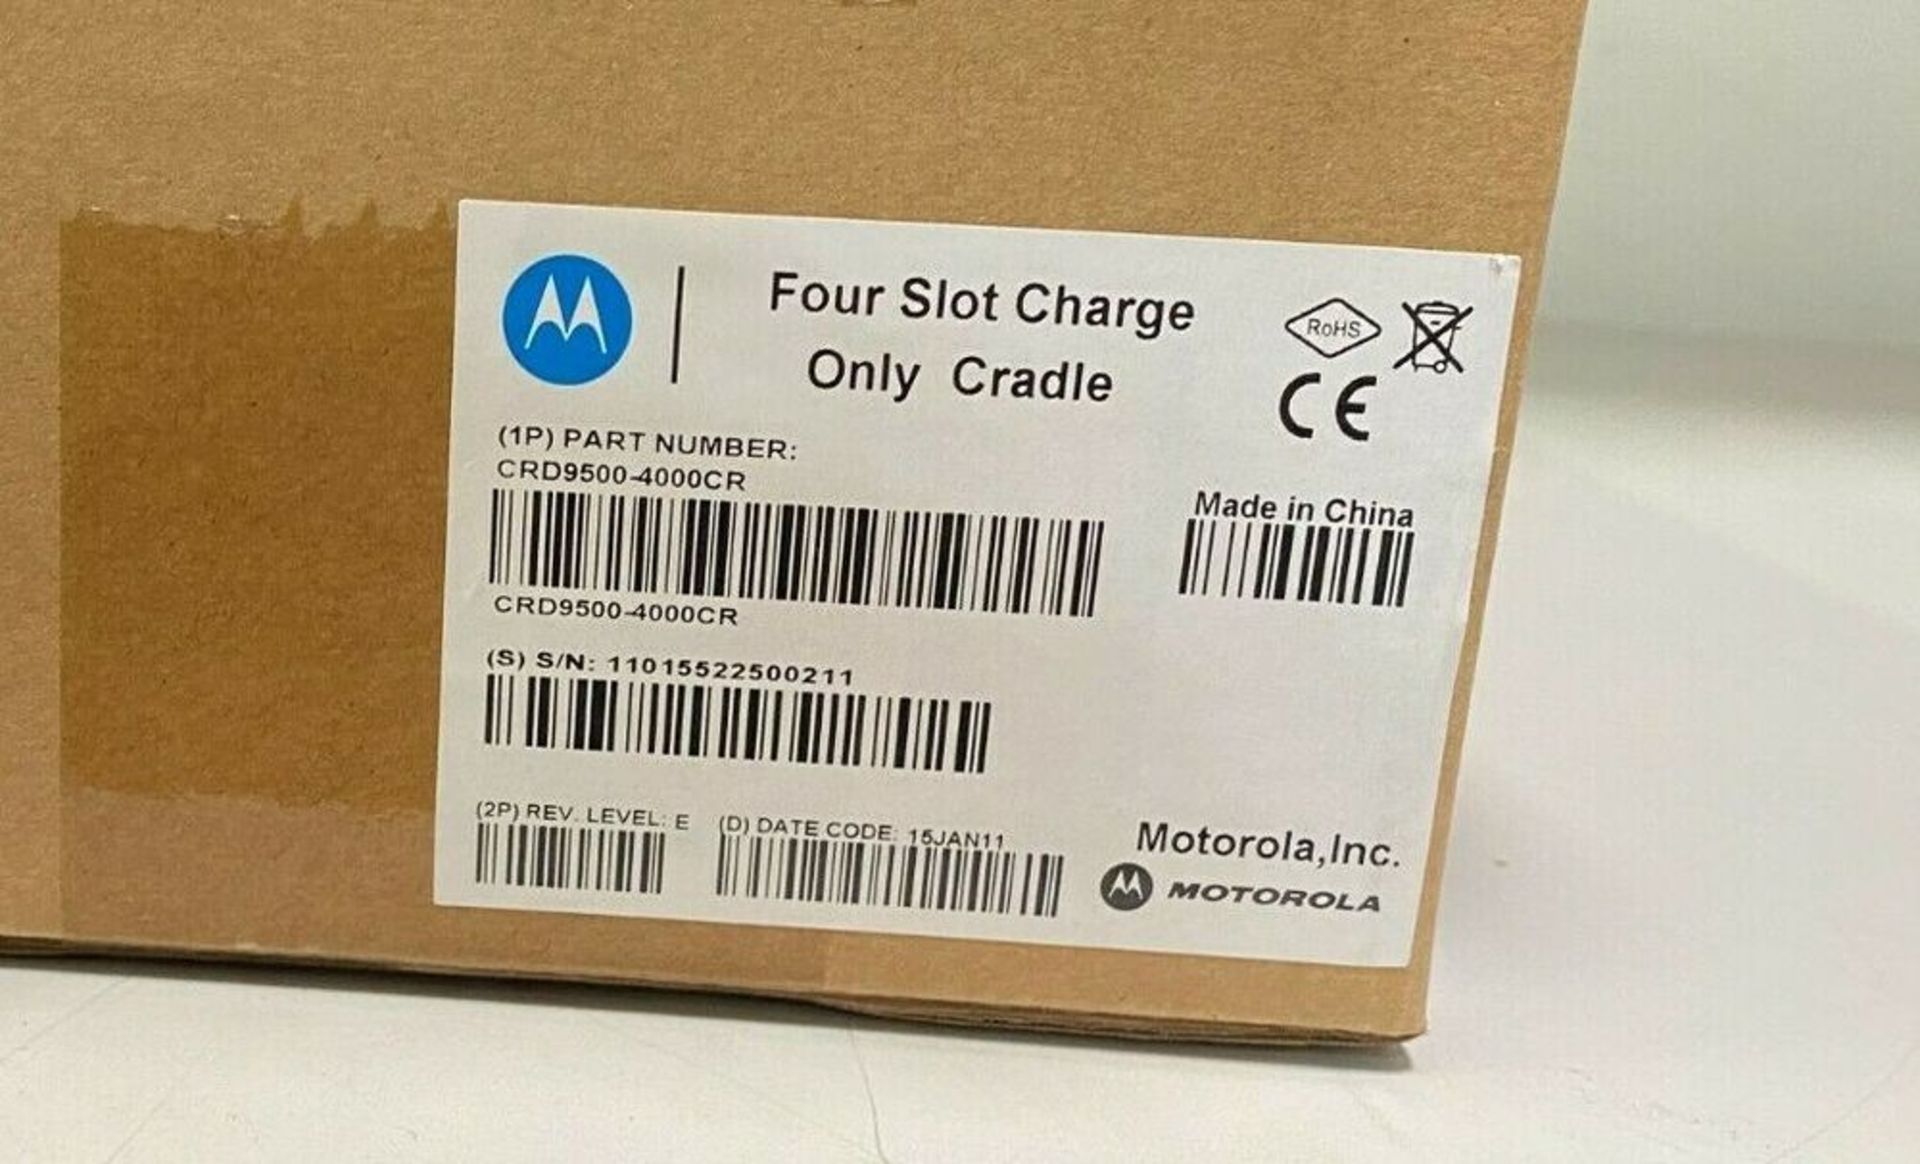 Motorola CRD-9500-4000CR Four Slot Charge Only Cradle - Battery Charger - Image 7 of 8